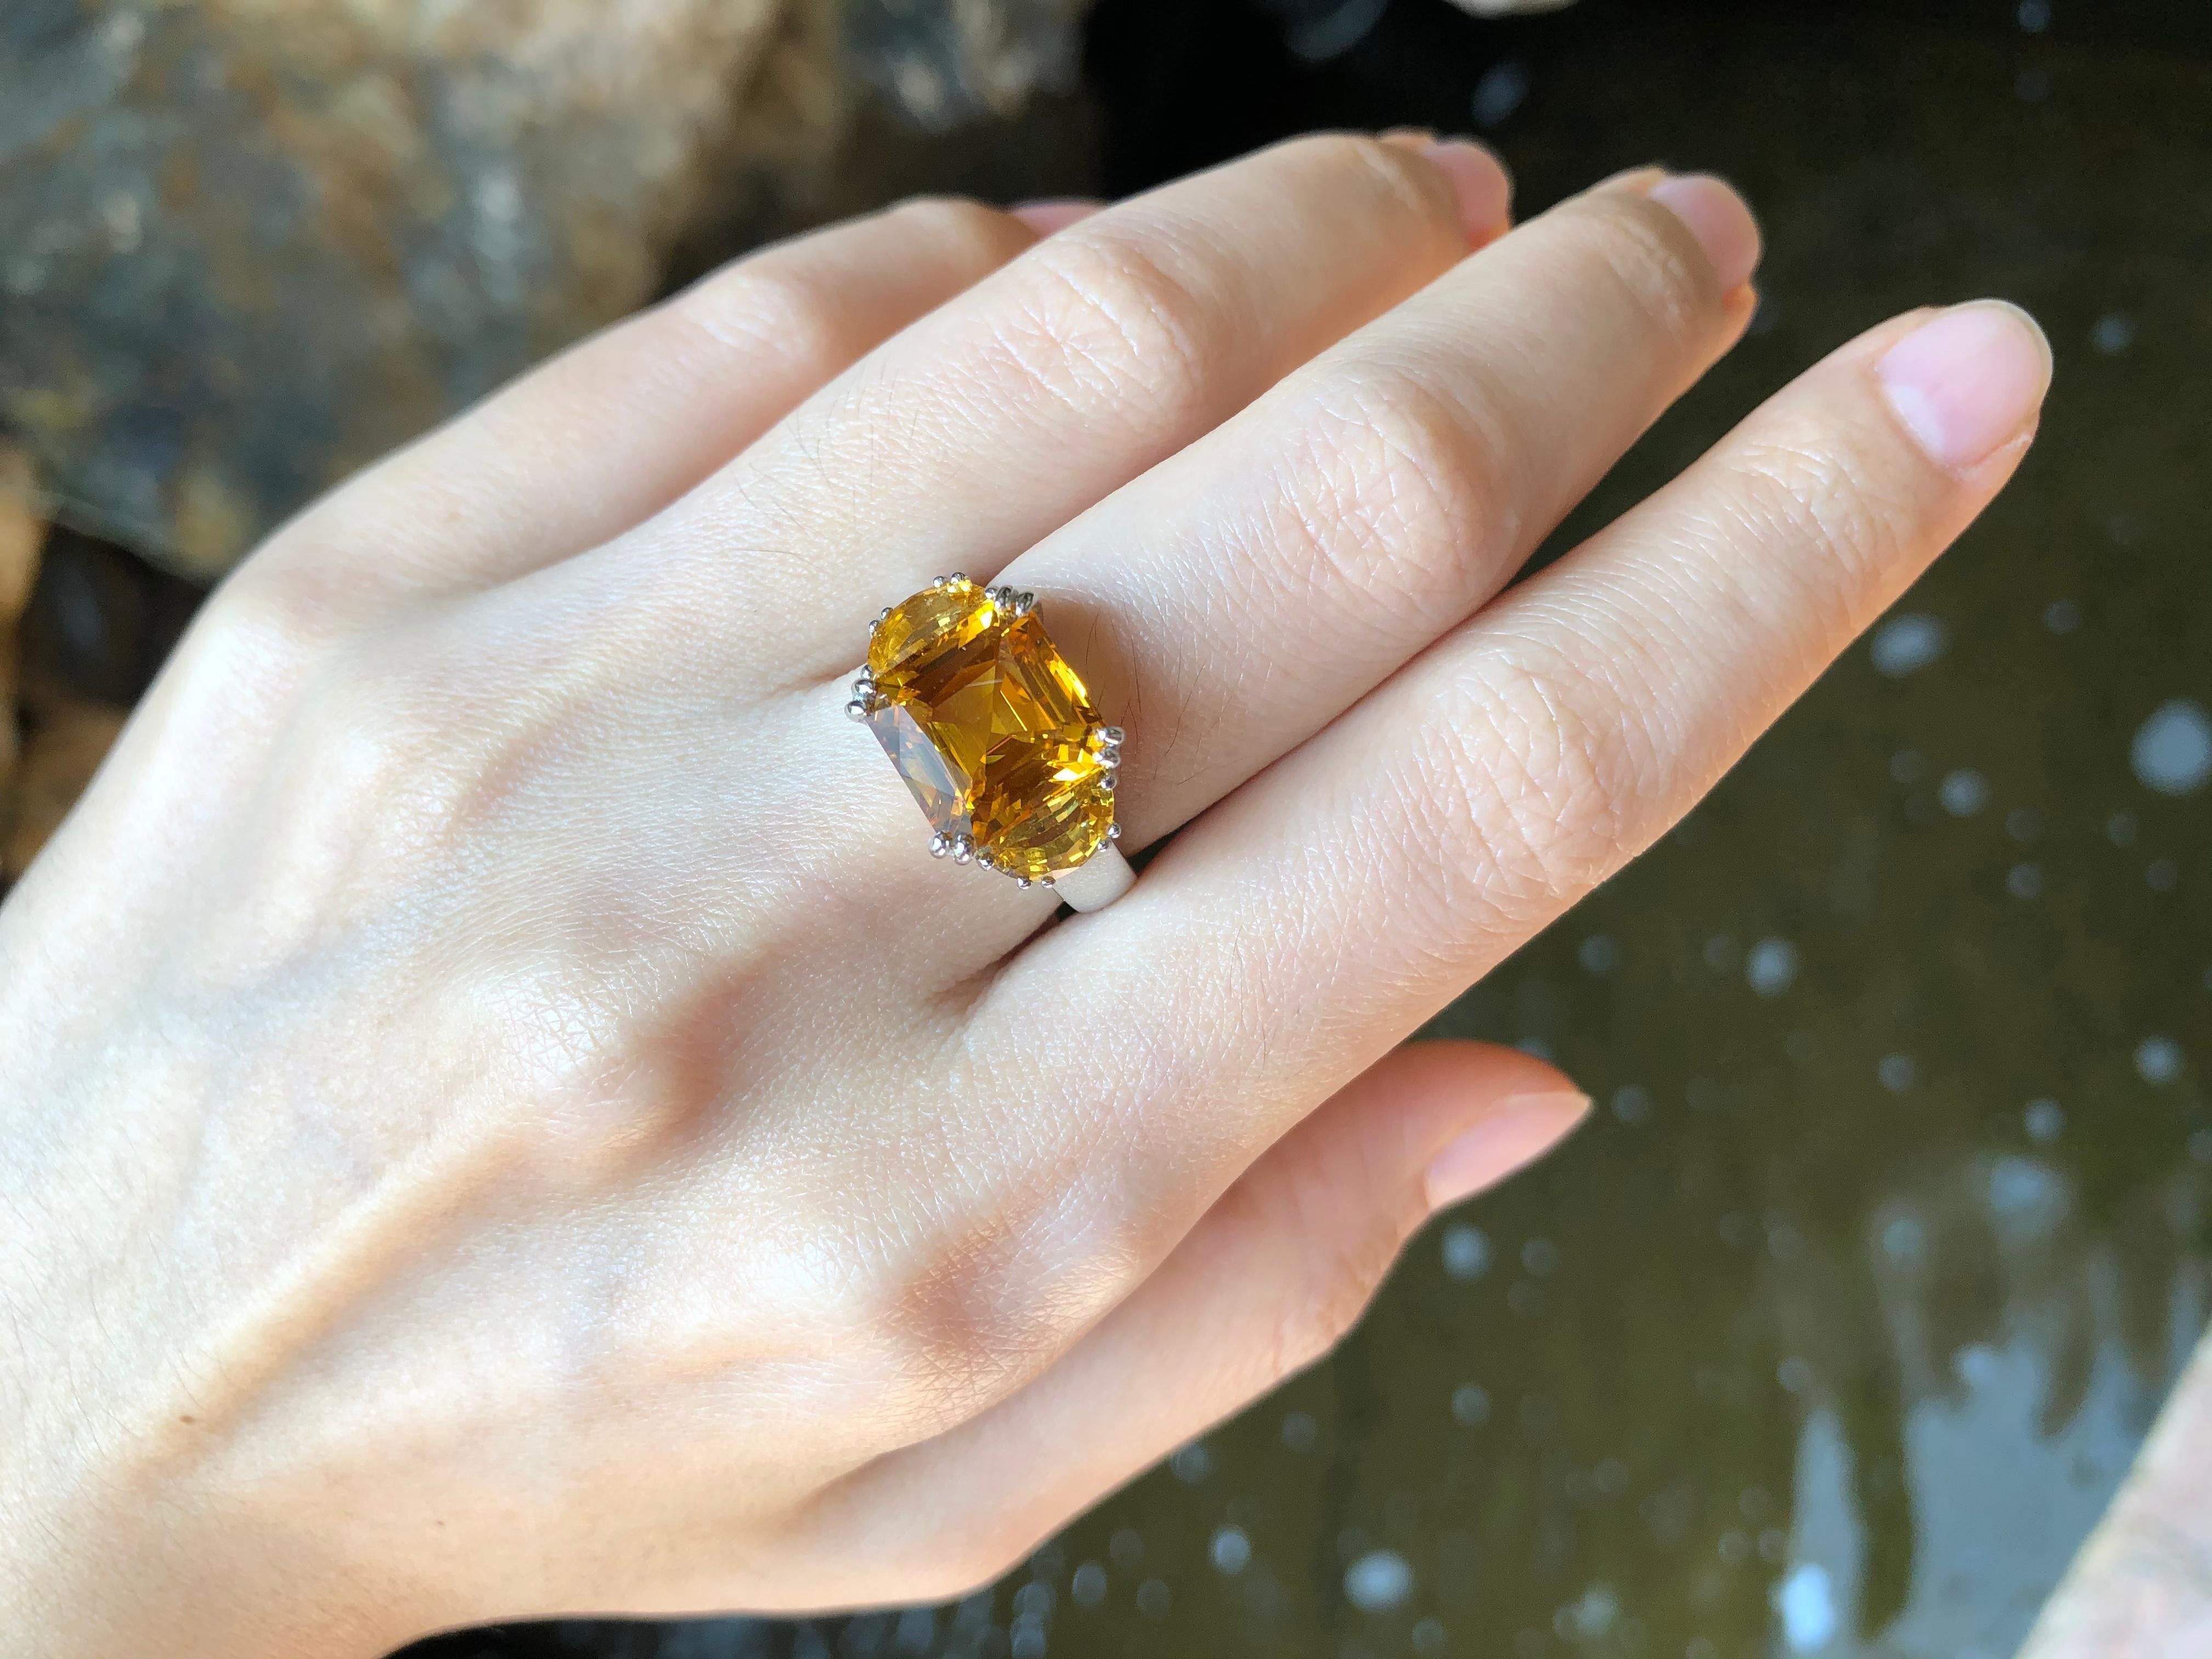 Yellow Sapphire 5.89 carats with Yellow Sapphire 1.48 carats Ring set in Platinum 950 Settings

Width:  1.6 cm 
Length: 1.0 cm
Ring Size: 51
Total Weight: 12.31 grams

